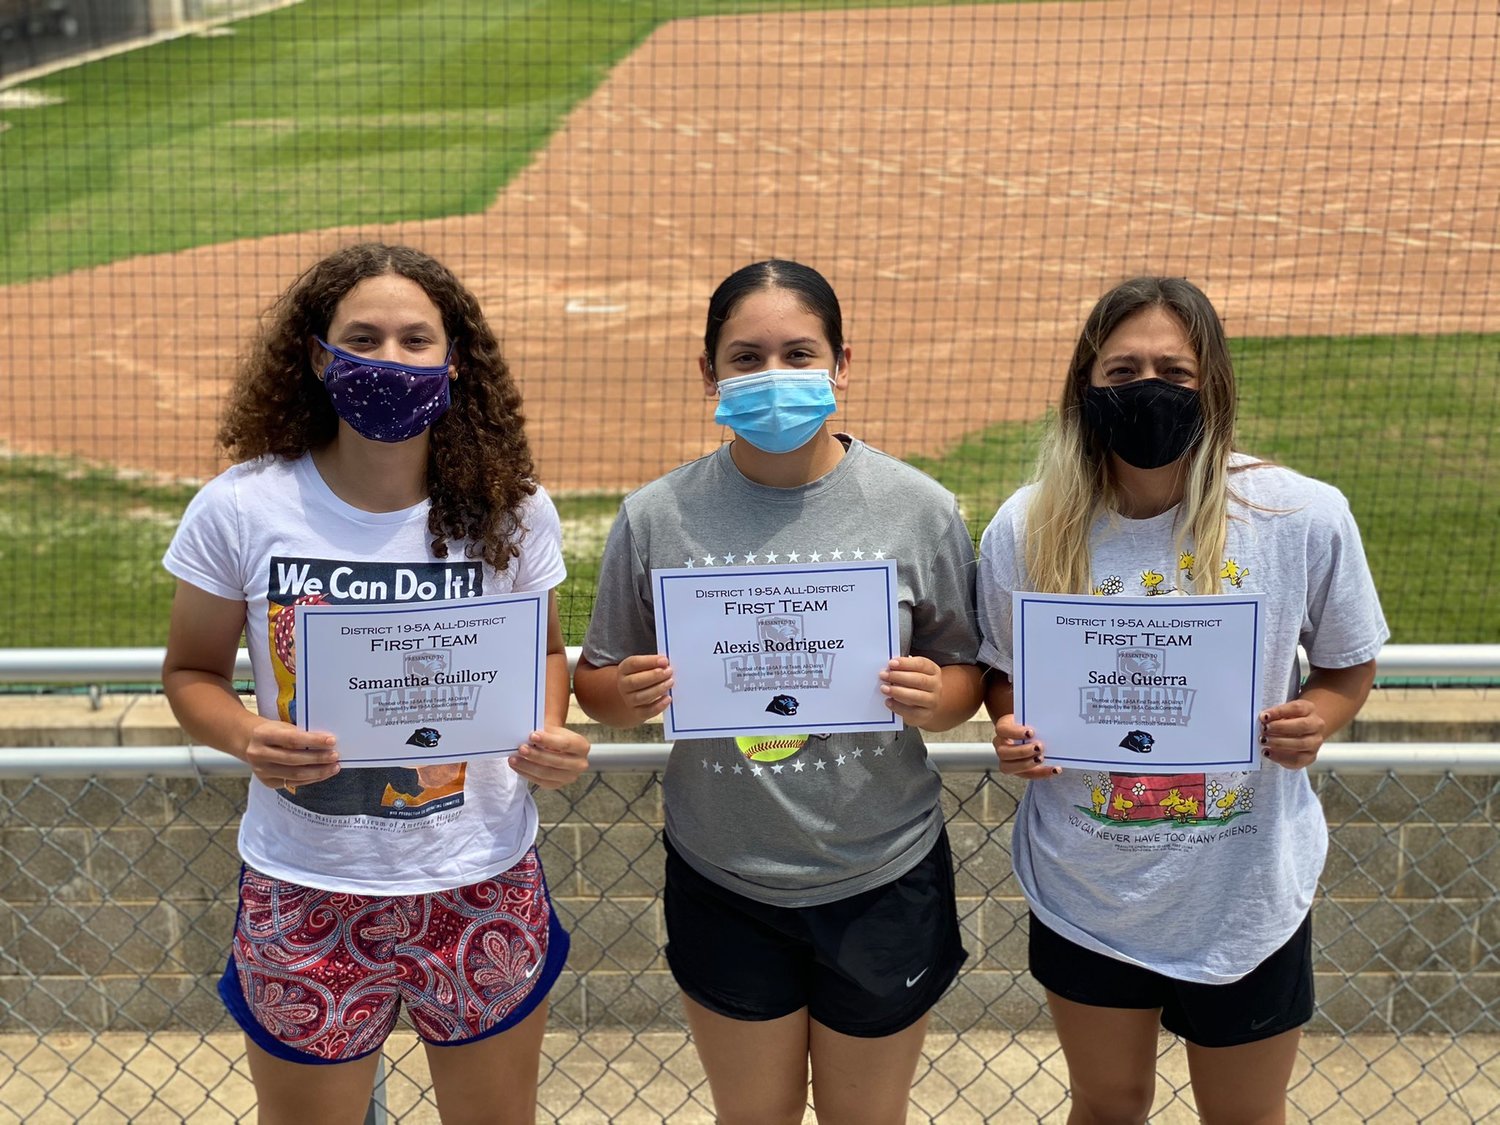 From left to right, Paetow’s Samantha Guillory, Alexis Rodriguez and Sade Guerra were named to the 19-5A softball all-district first team.